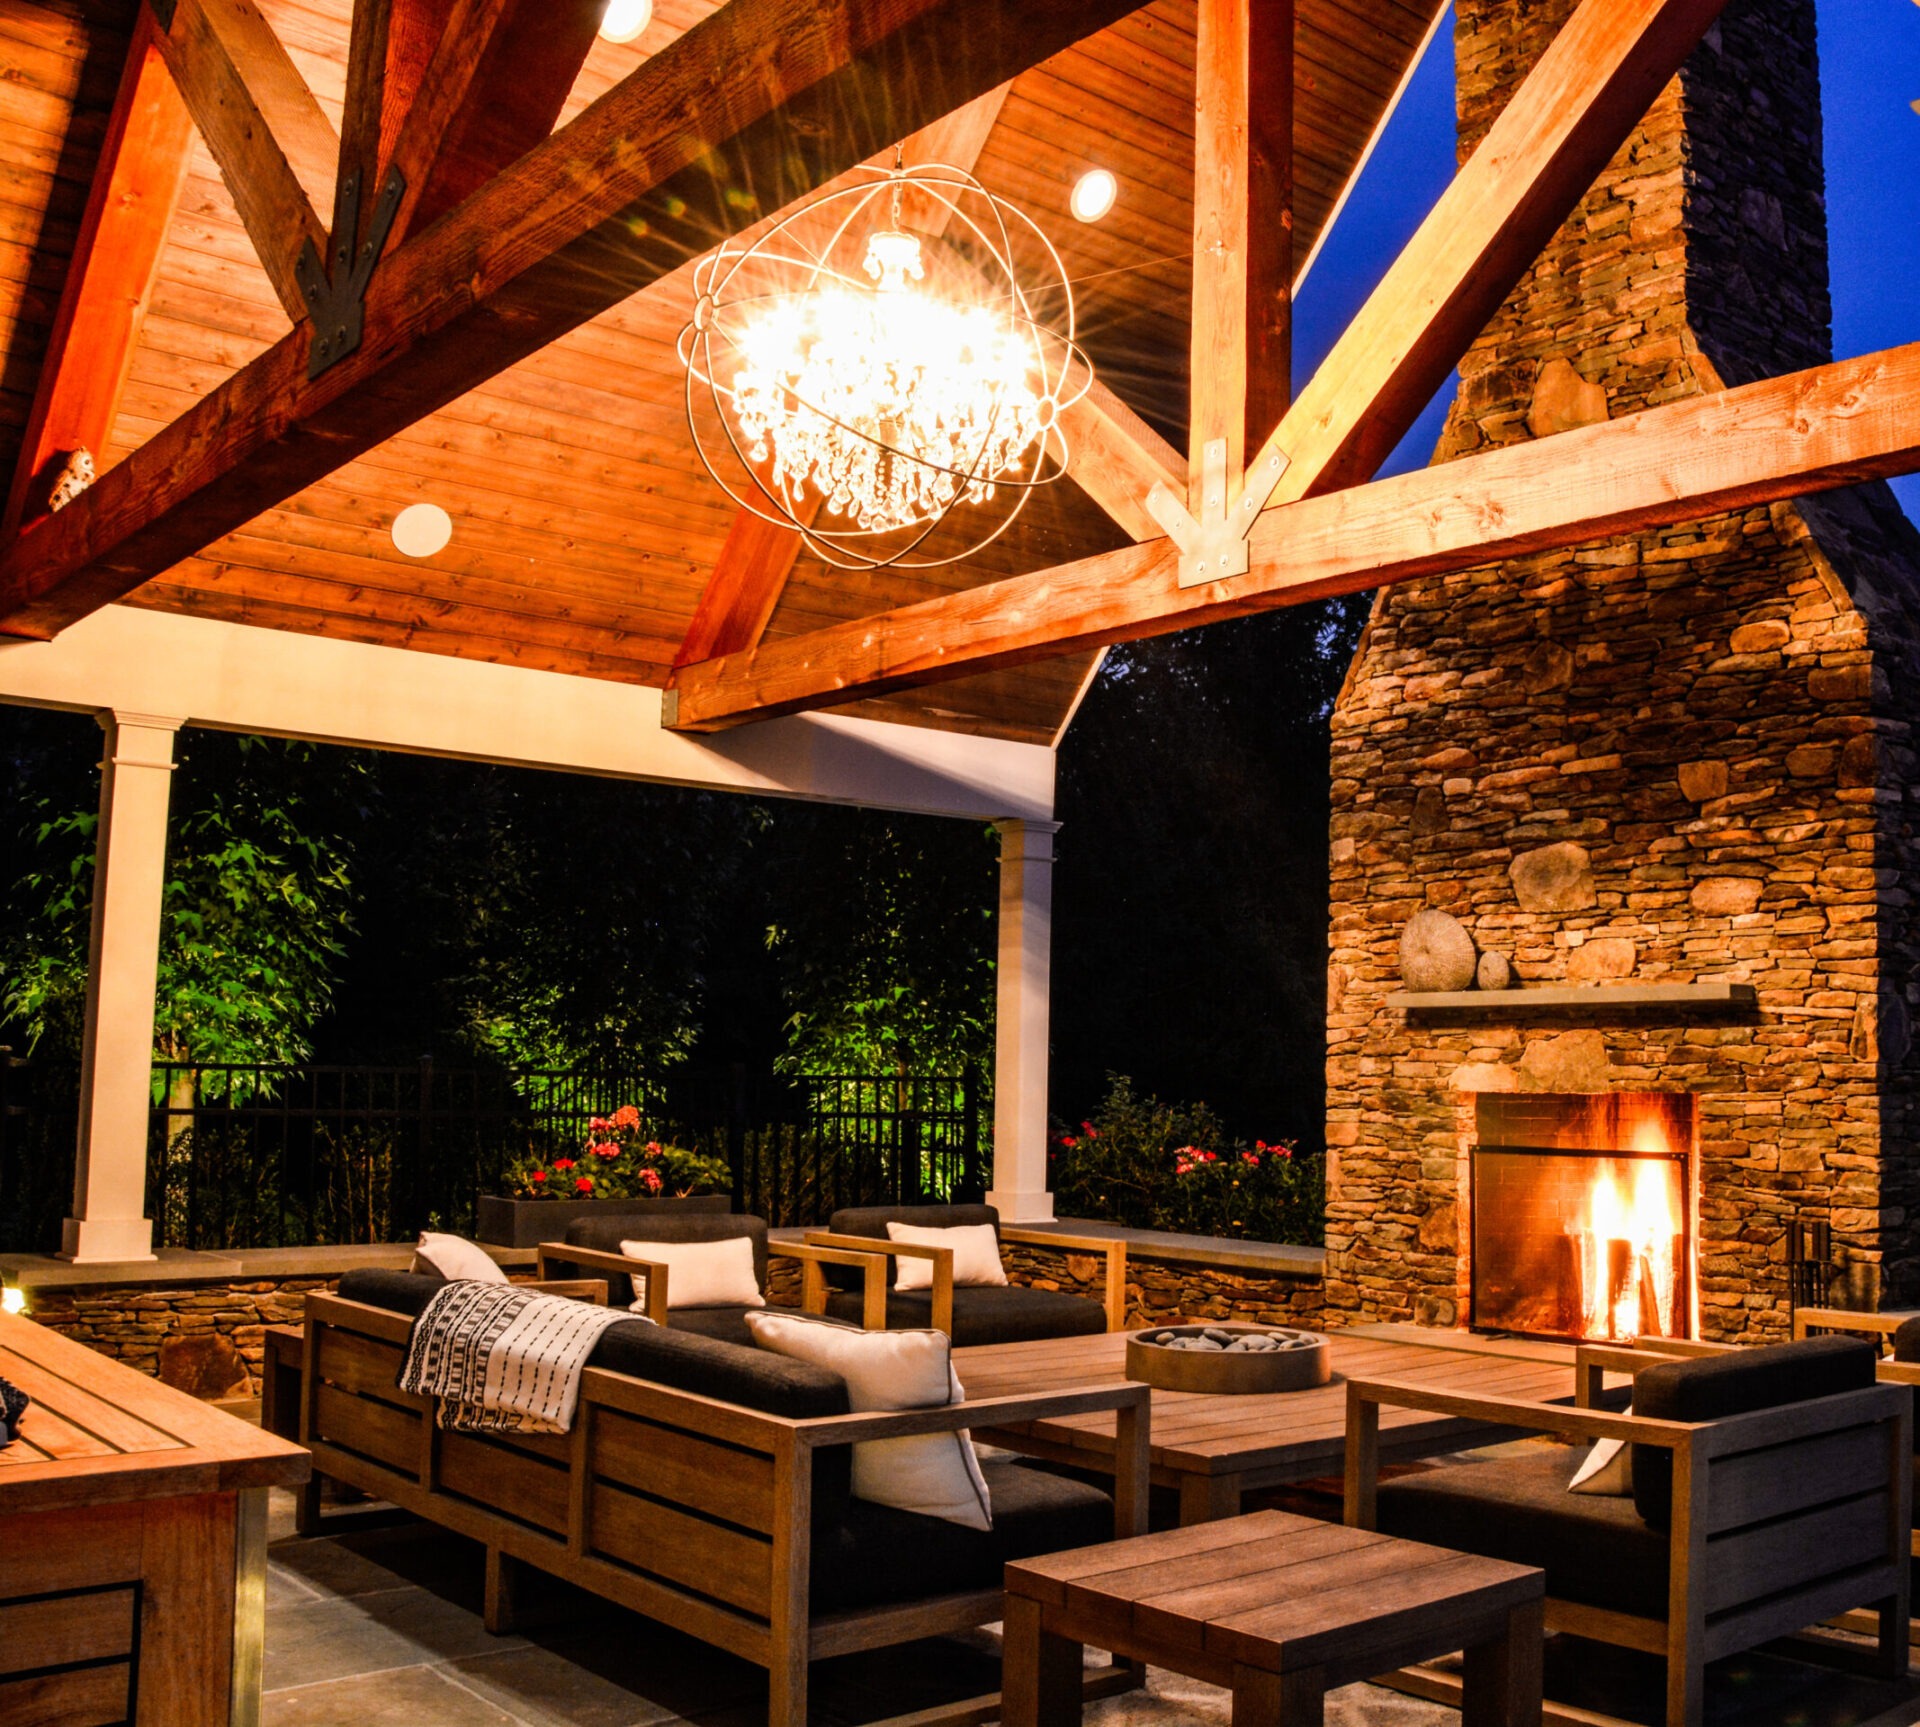 This image shows an outdoor covered patio at dusk with wooden furniture, a lit fireplace, a chandelier, and a warm, inviting ambiance.